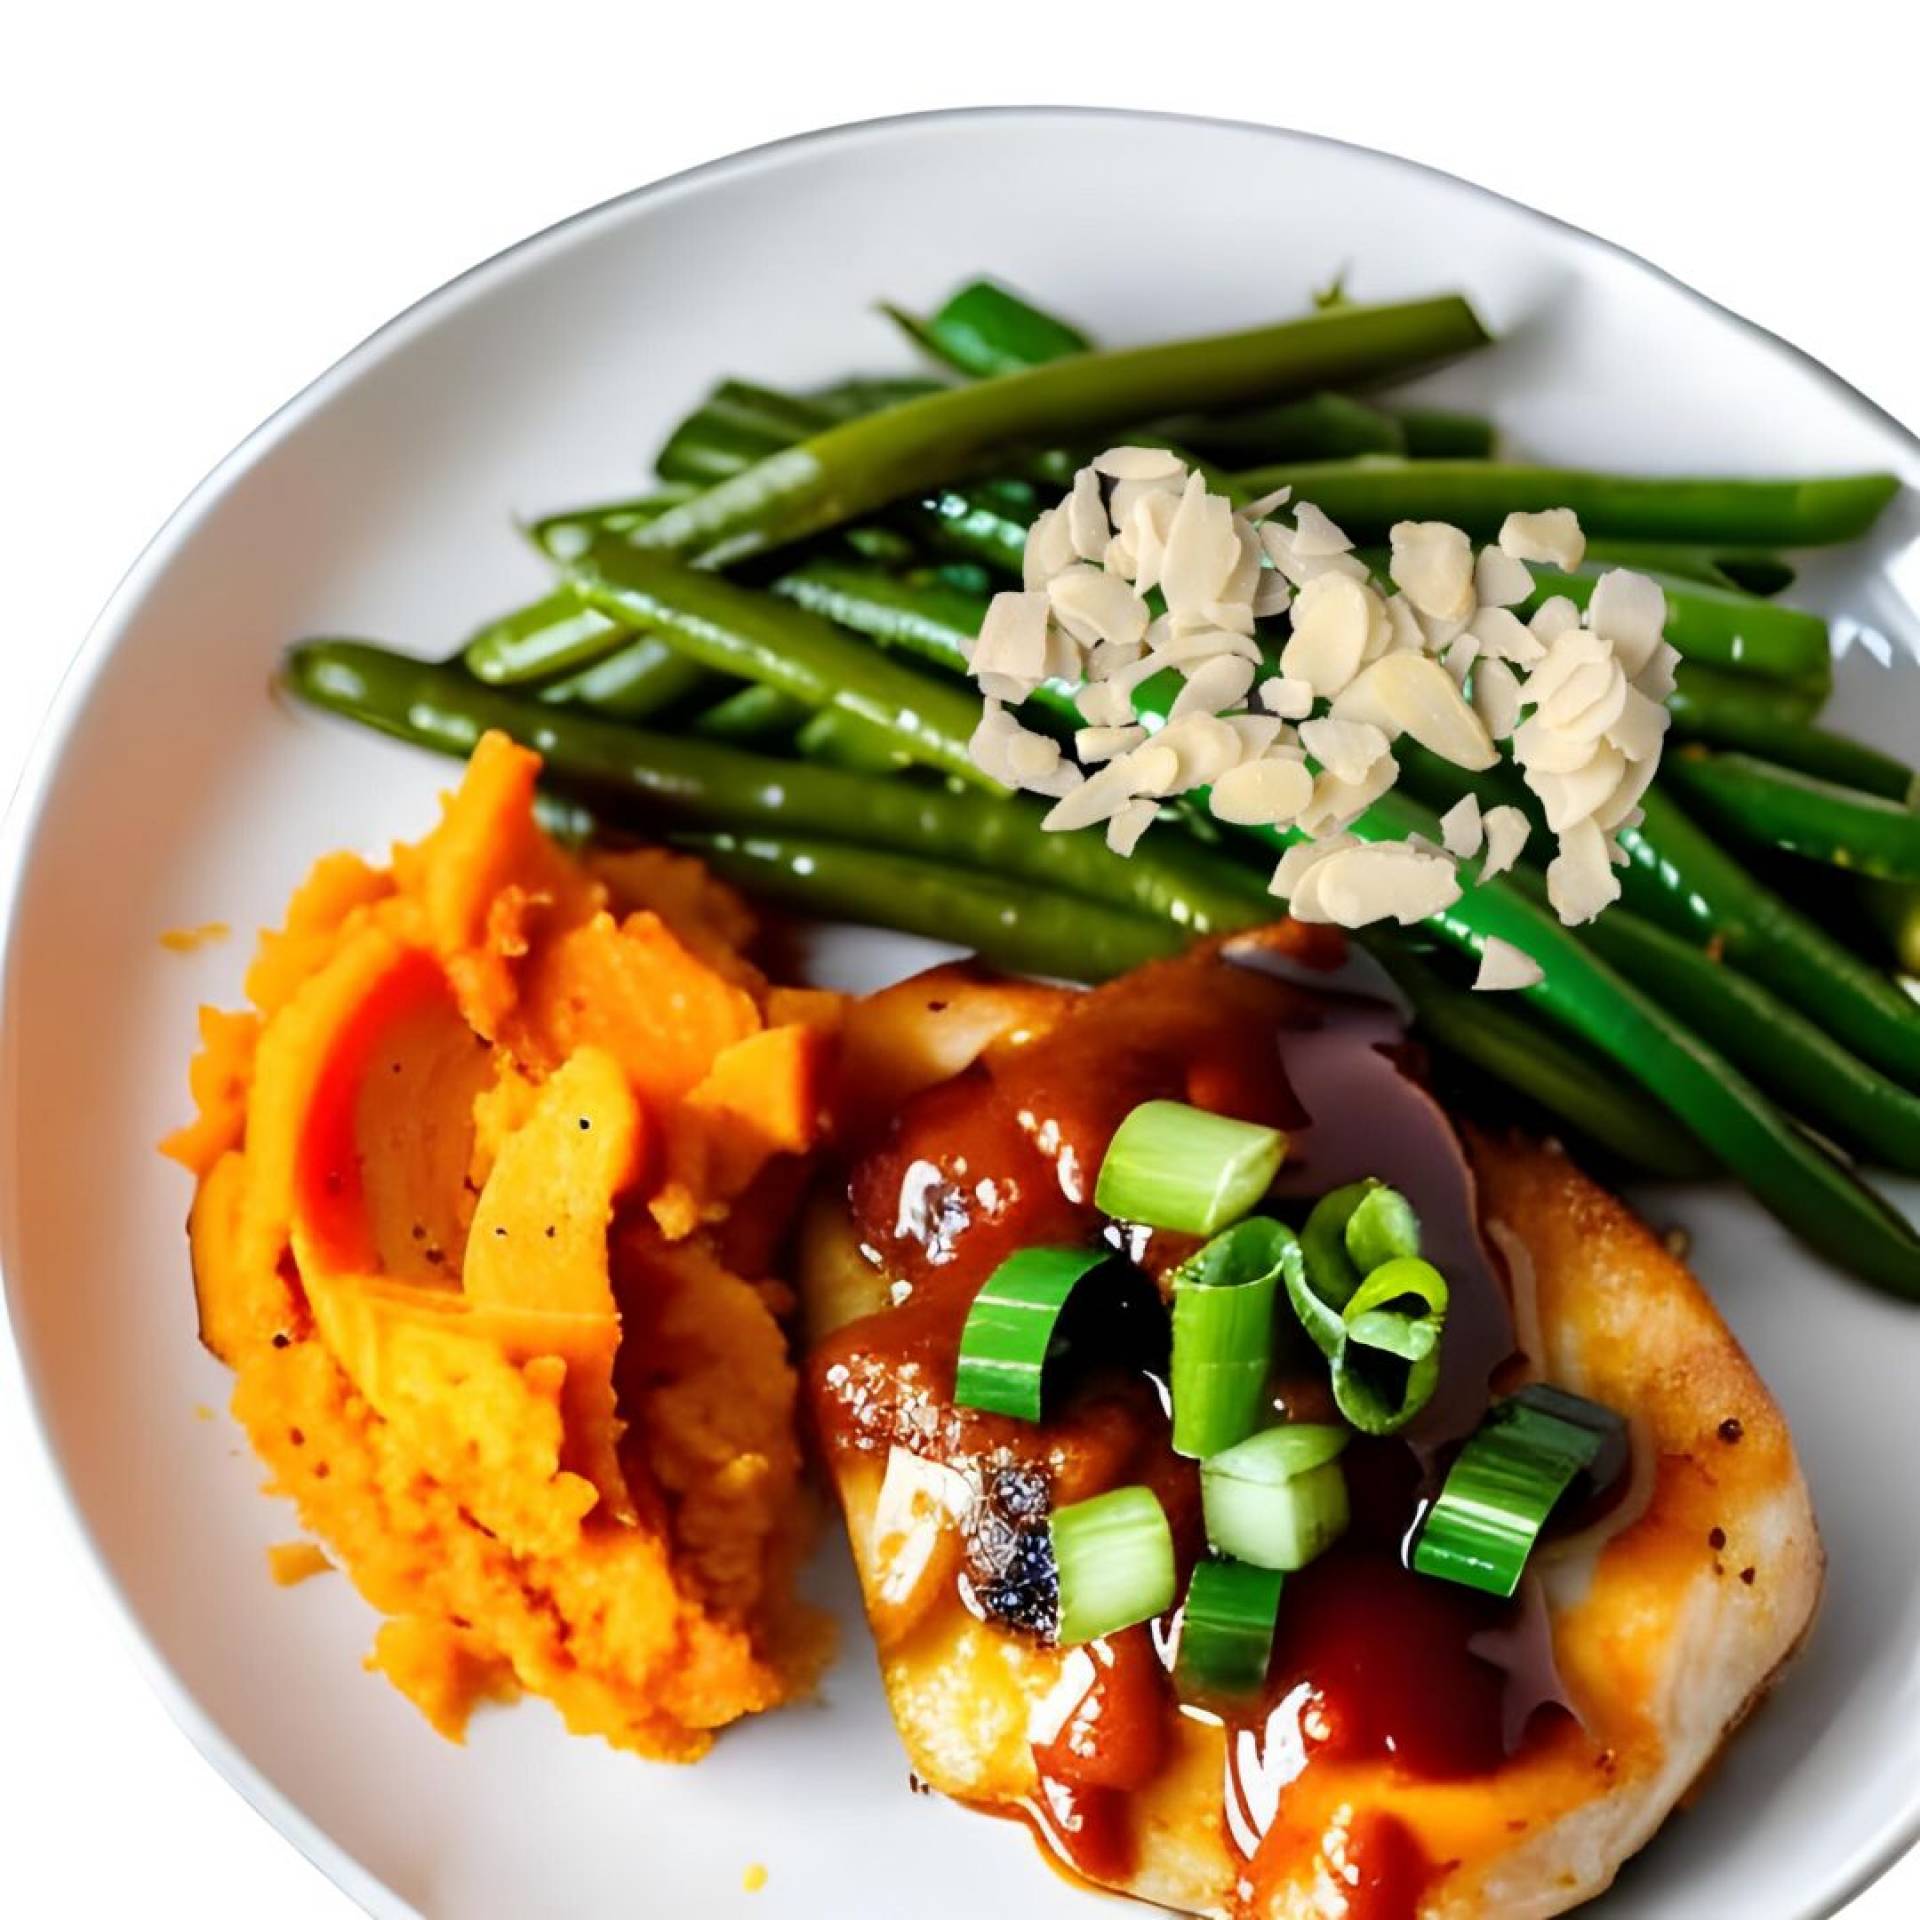 BBQ Chicken with Whipped Sweet Potatoes & Green Beans Almondine